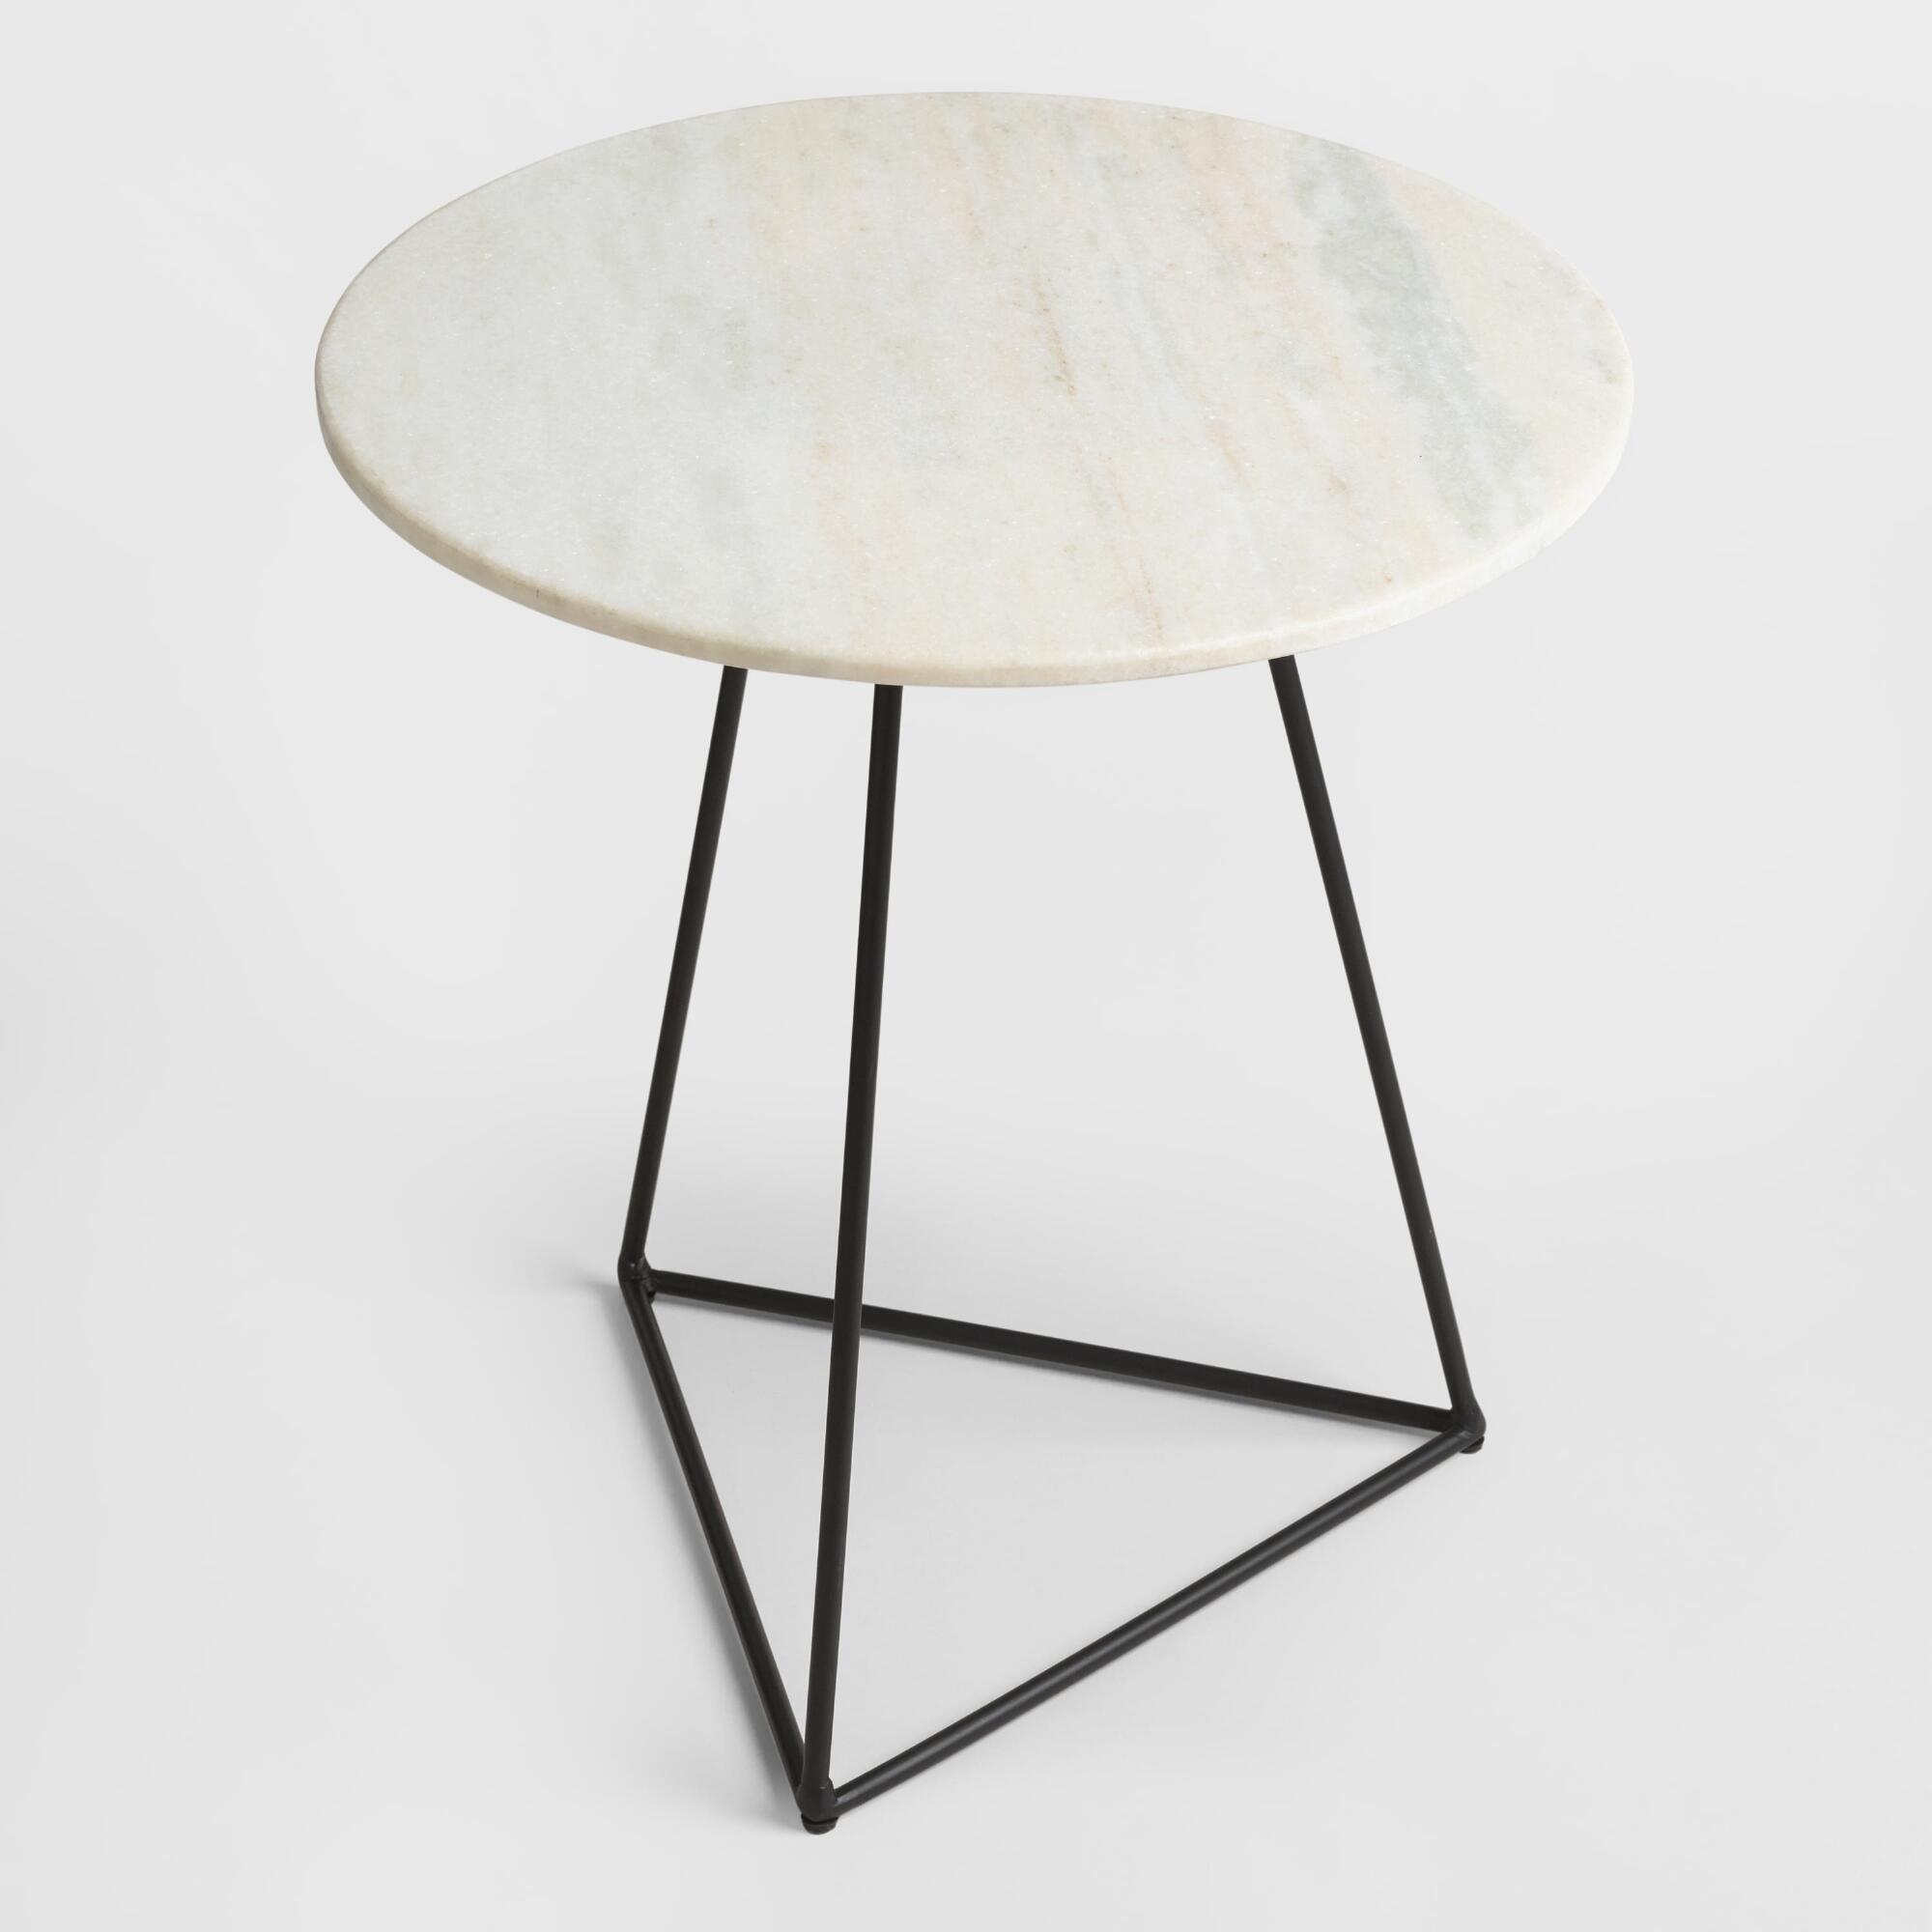 handcrafted skilled artisans our versatile side table accent features natural marble top alabaster white with gray undertones and subtle gold green tiffany lamp shade pier one